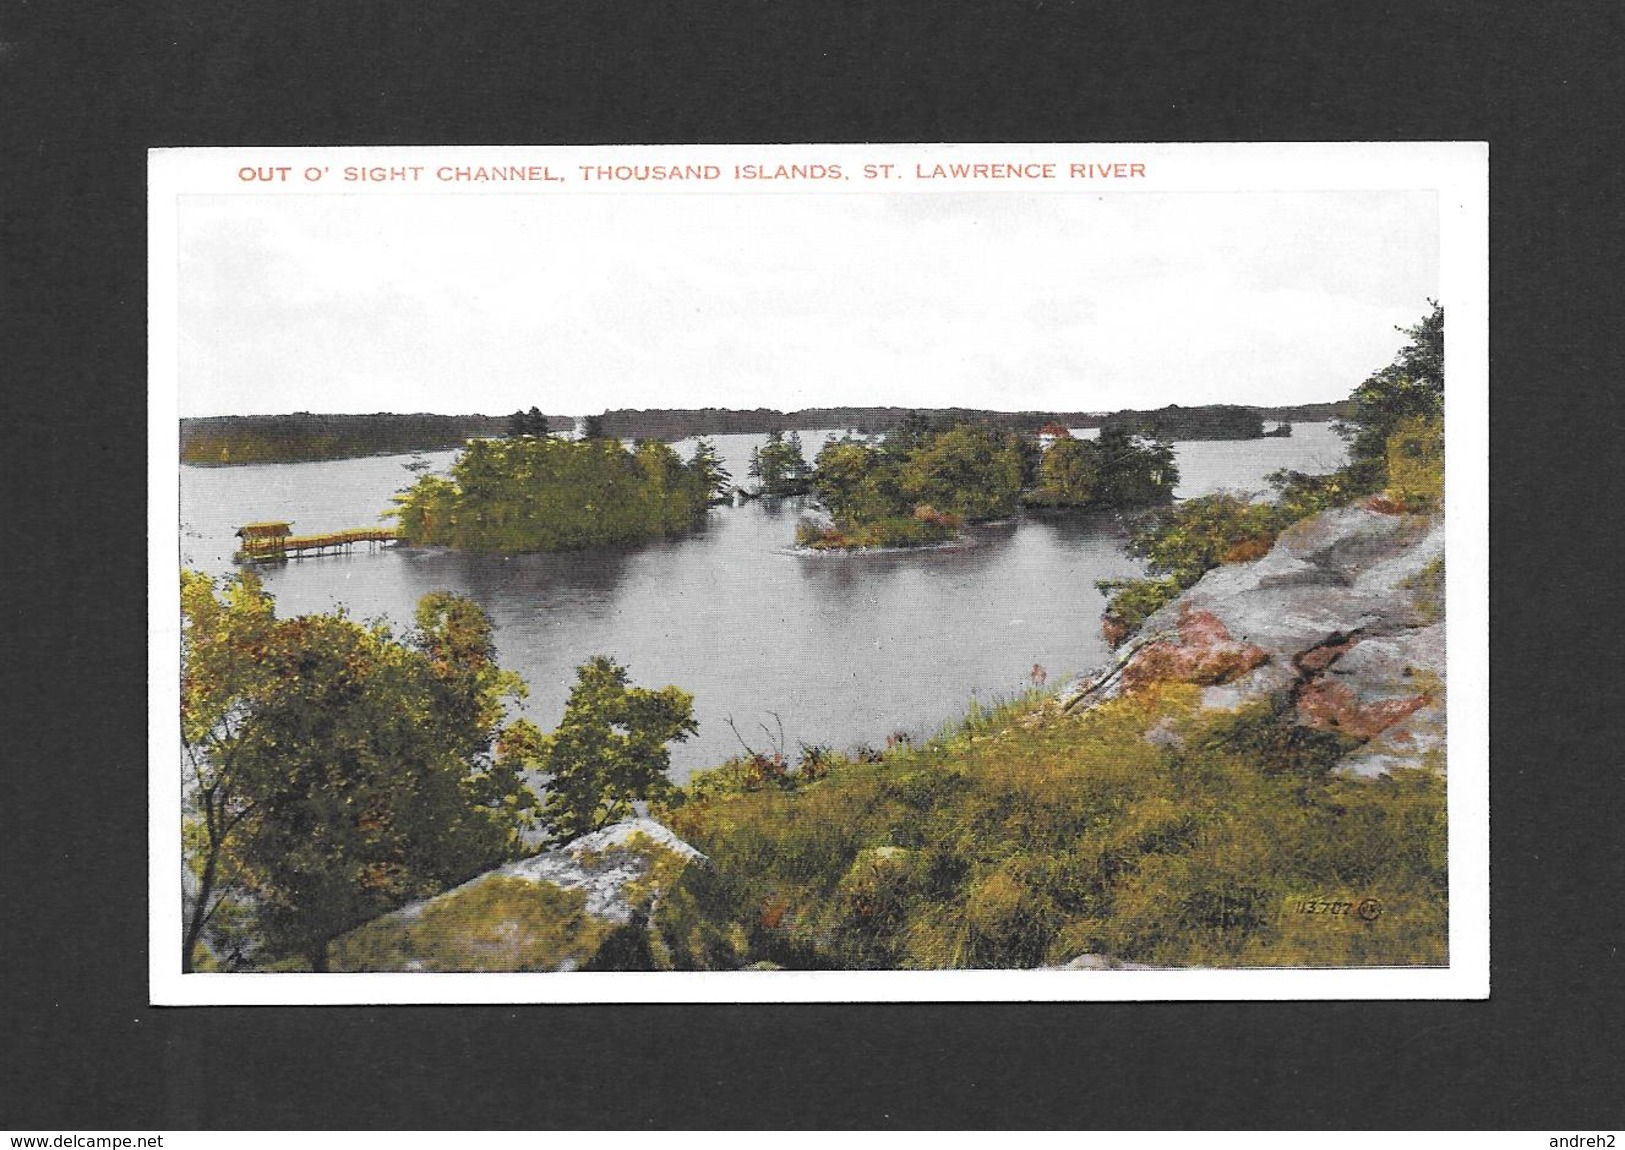 OUT O'SIGHT - THOUSAND ISLANDS - ONTARIO - ST LAWRENCE RIVER - BY VALENTINE BLACK - Thousand Islands